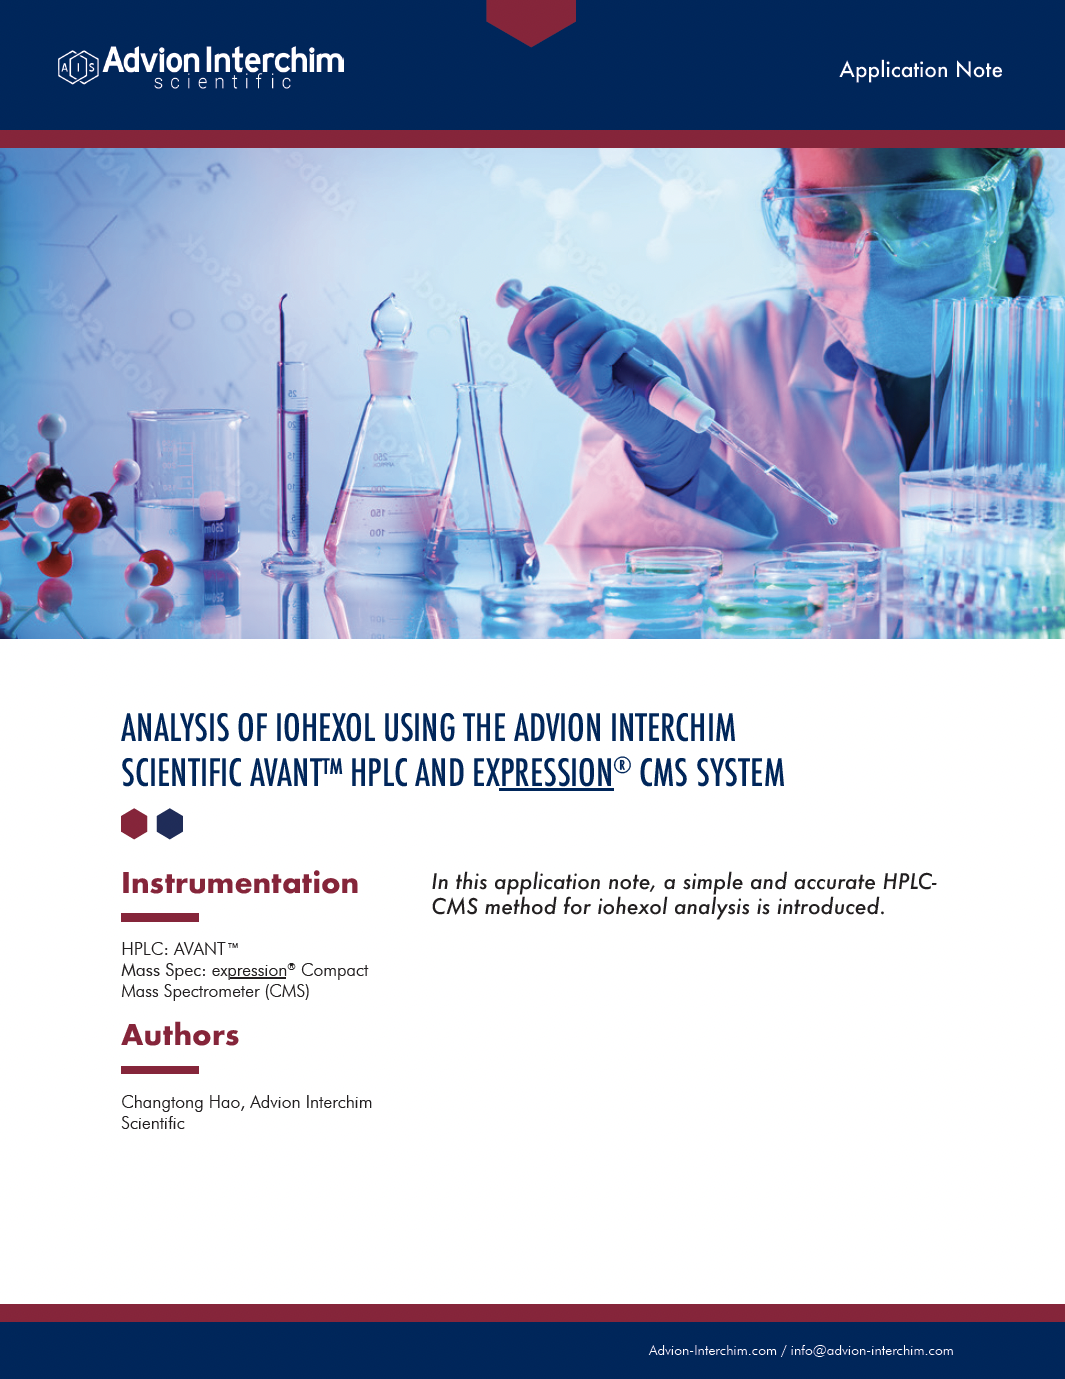 Analysis of Iohexol using the Advion Interchim Scientific AVANT™ HPLC and ex<u>press<strong>ion</strong></u>® CMS System